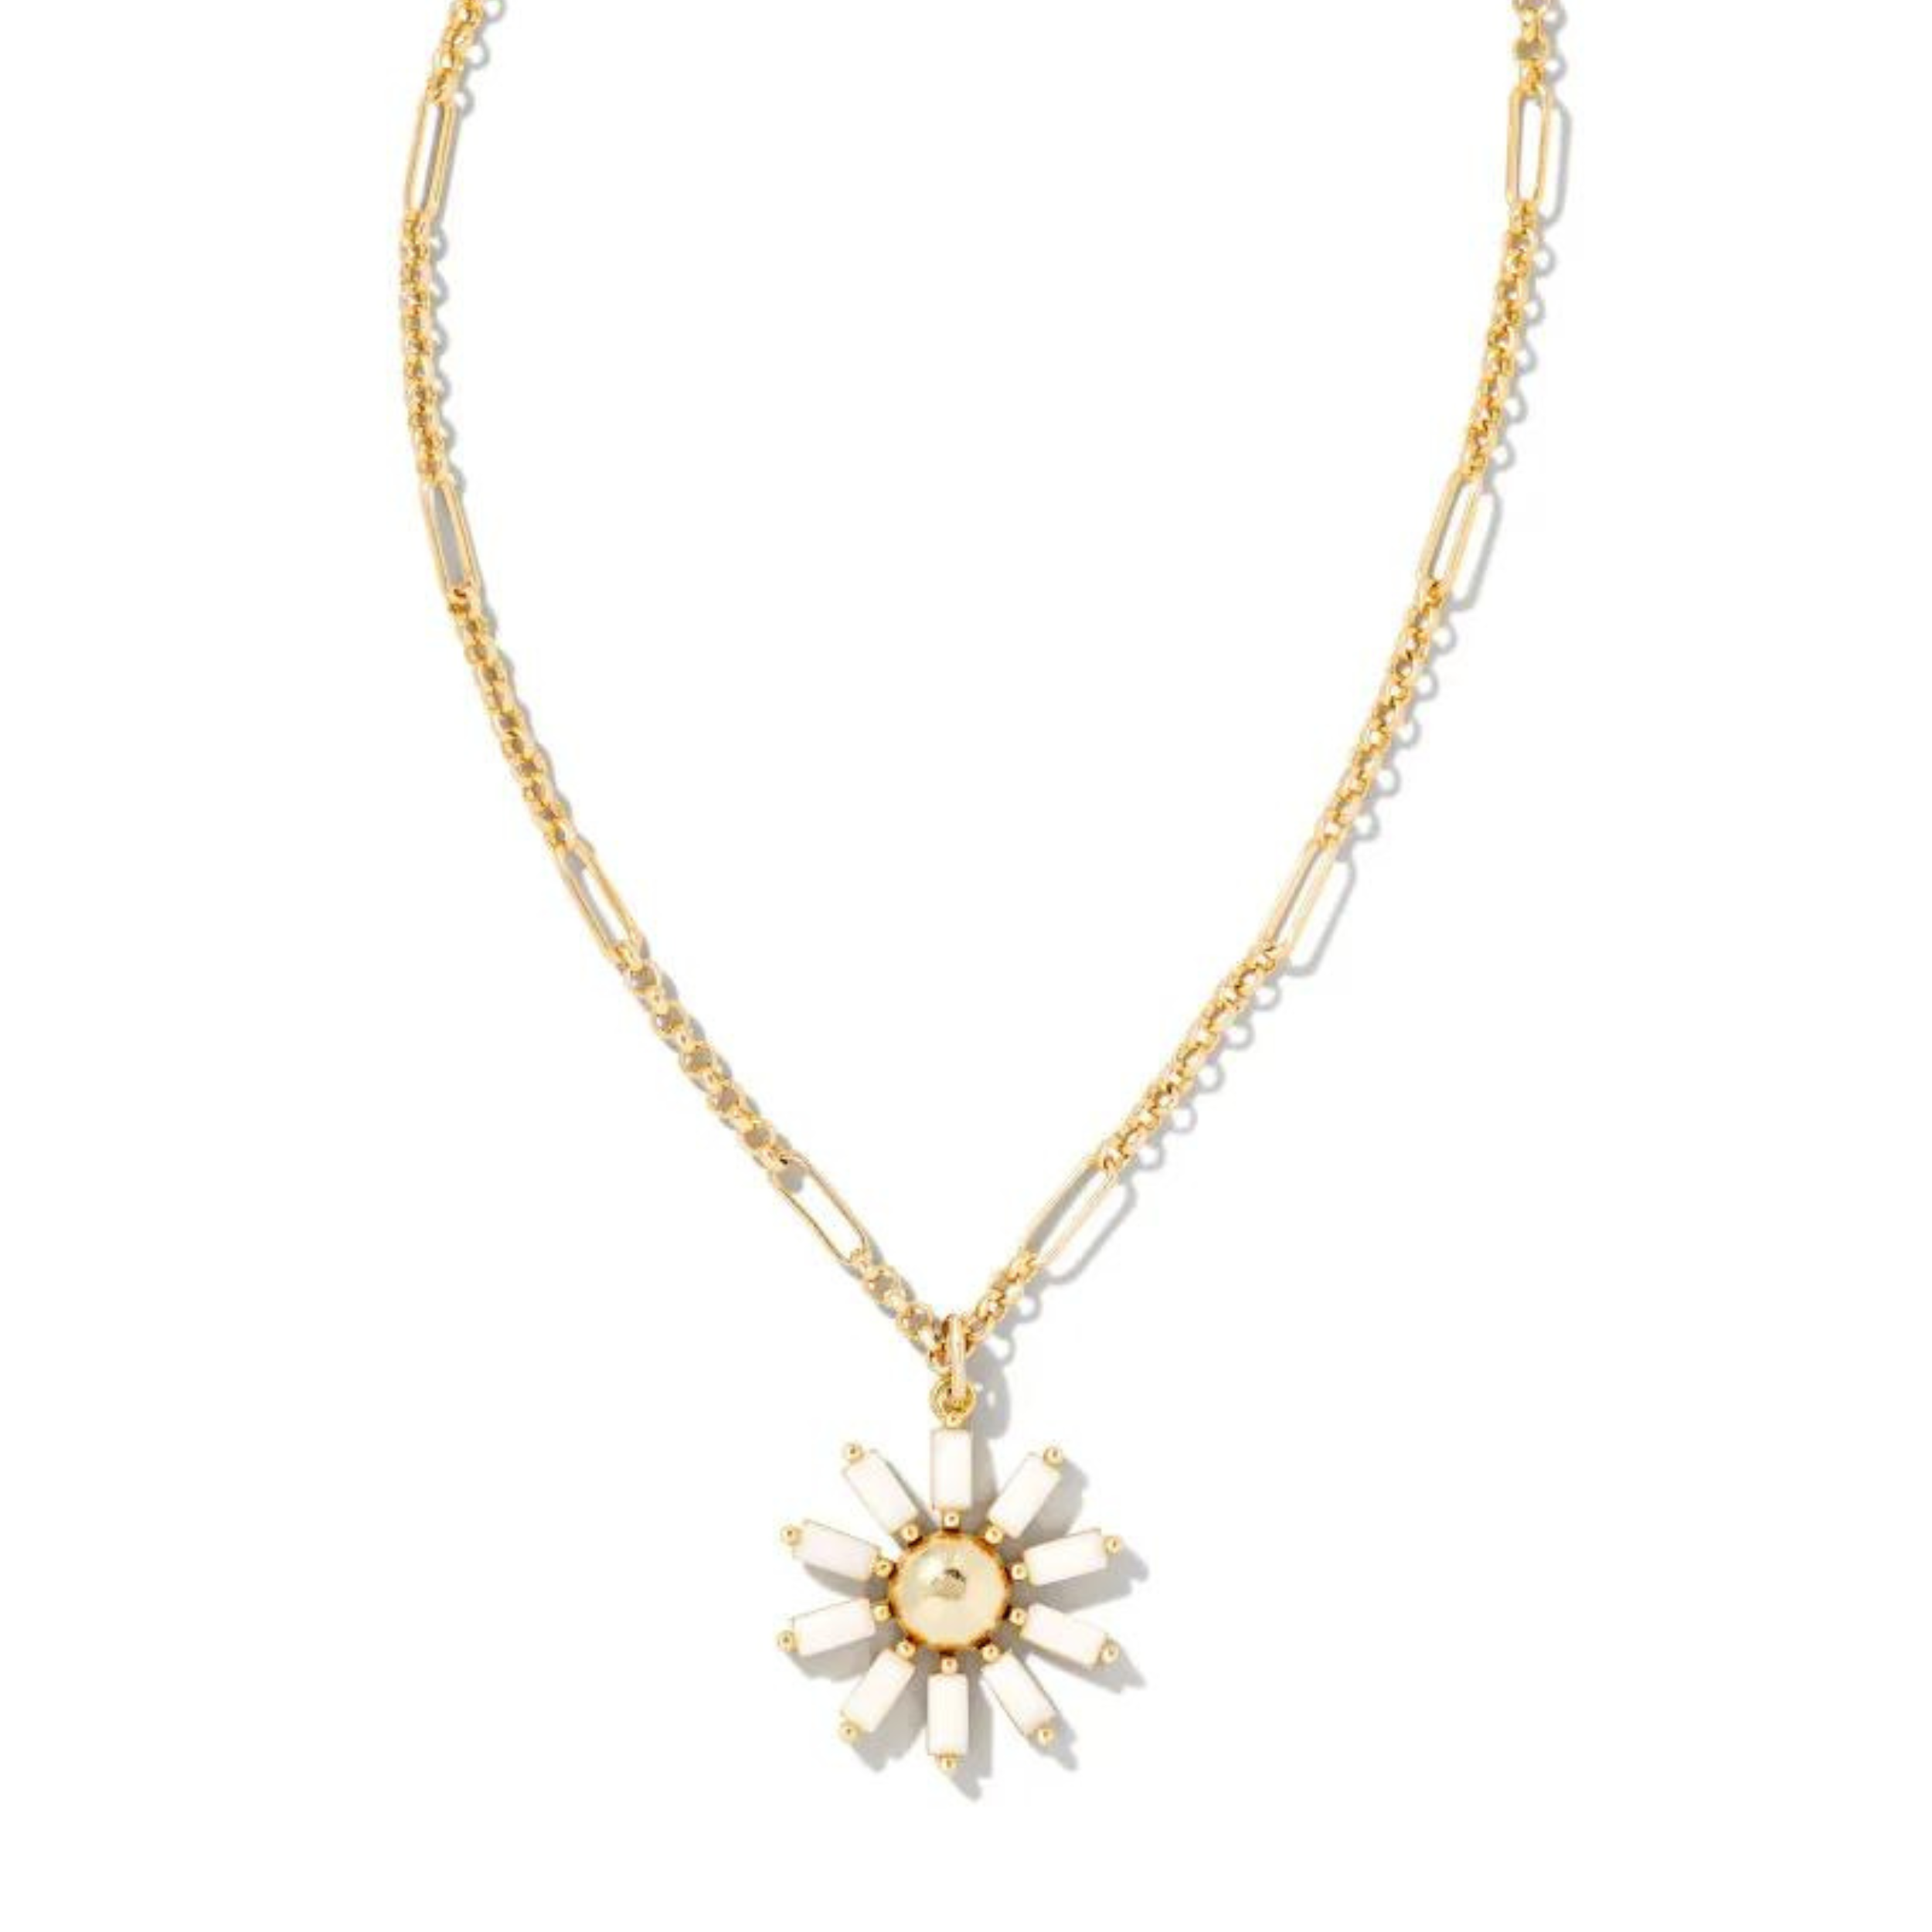 Gold chain necklace with a white flower pendant, pictured on a white background.